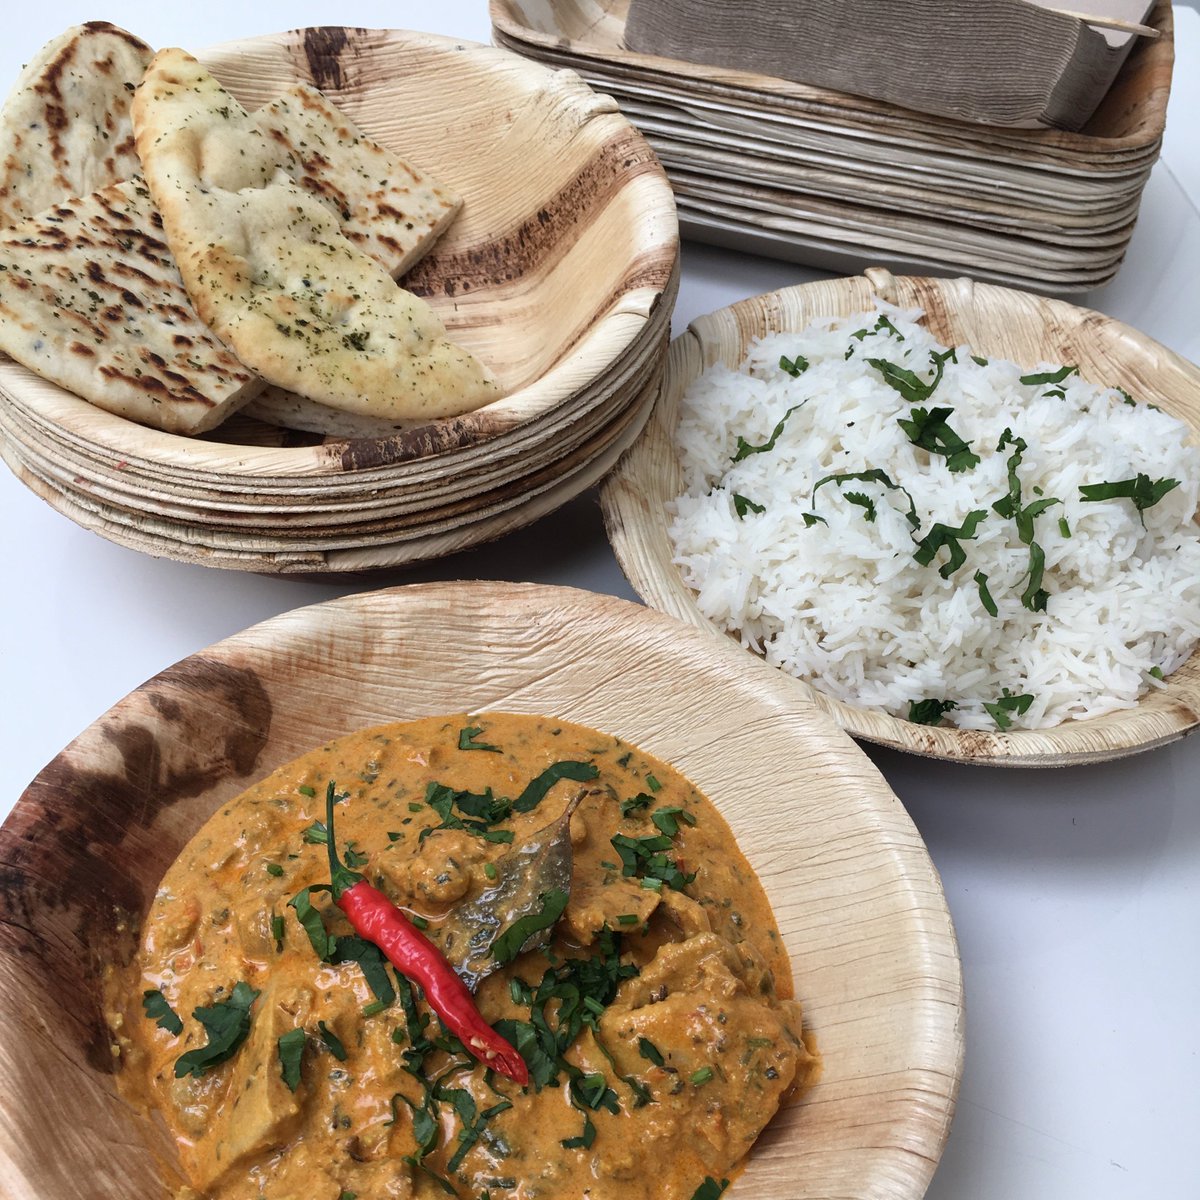 To celebrate #NationalRiceWeek we just wanted to share some of the wonderful photos our caterers have sent us using our #biodegradable #tableware - don't they look great?! @emma_idelica @HariGhotra #ecofriendly #catering #events #weddings #streetfood #parties